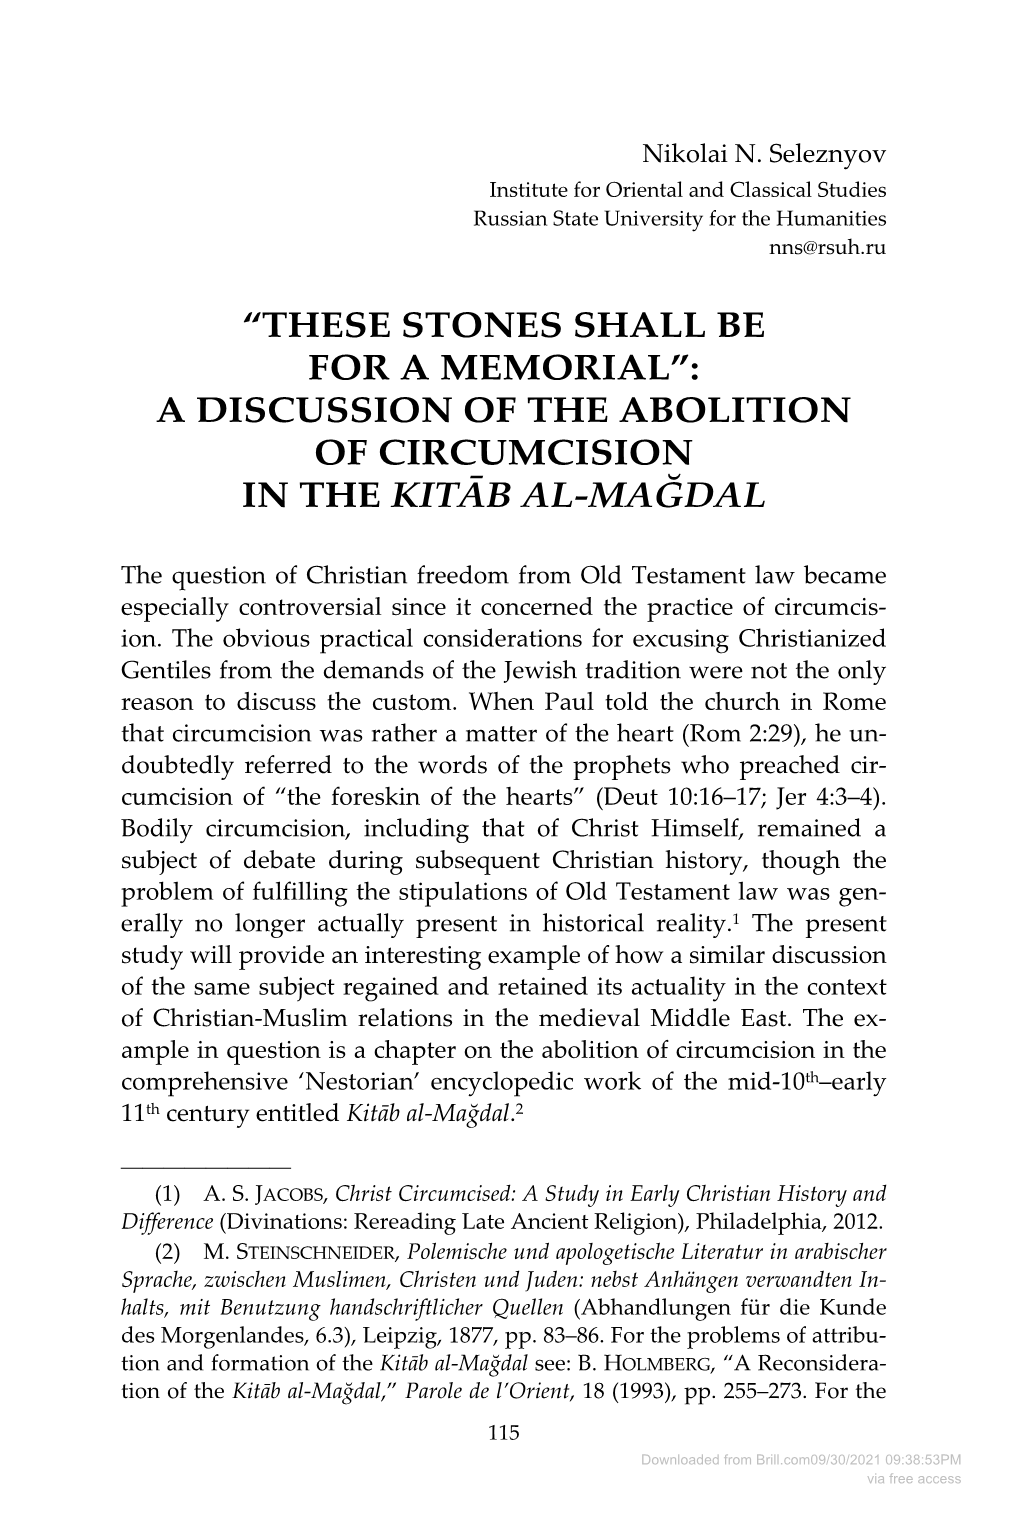 A Discussion of the Abolition of Circumcision in the Kitāb Al‐Mağdal